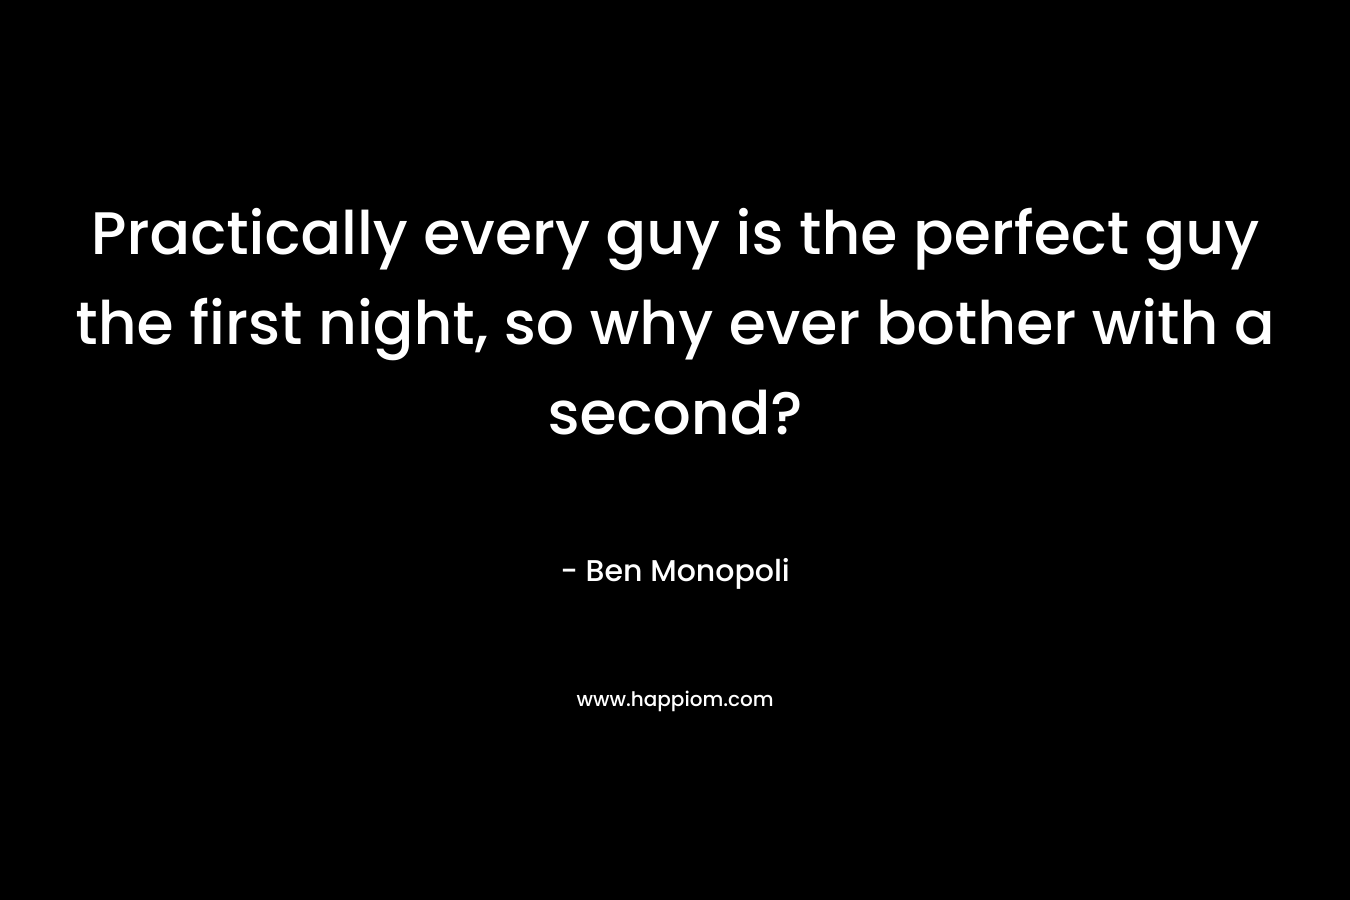 Practically every guy is the perfect guy the first night, so why ever bother with a second? – Ben Monopoli